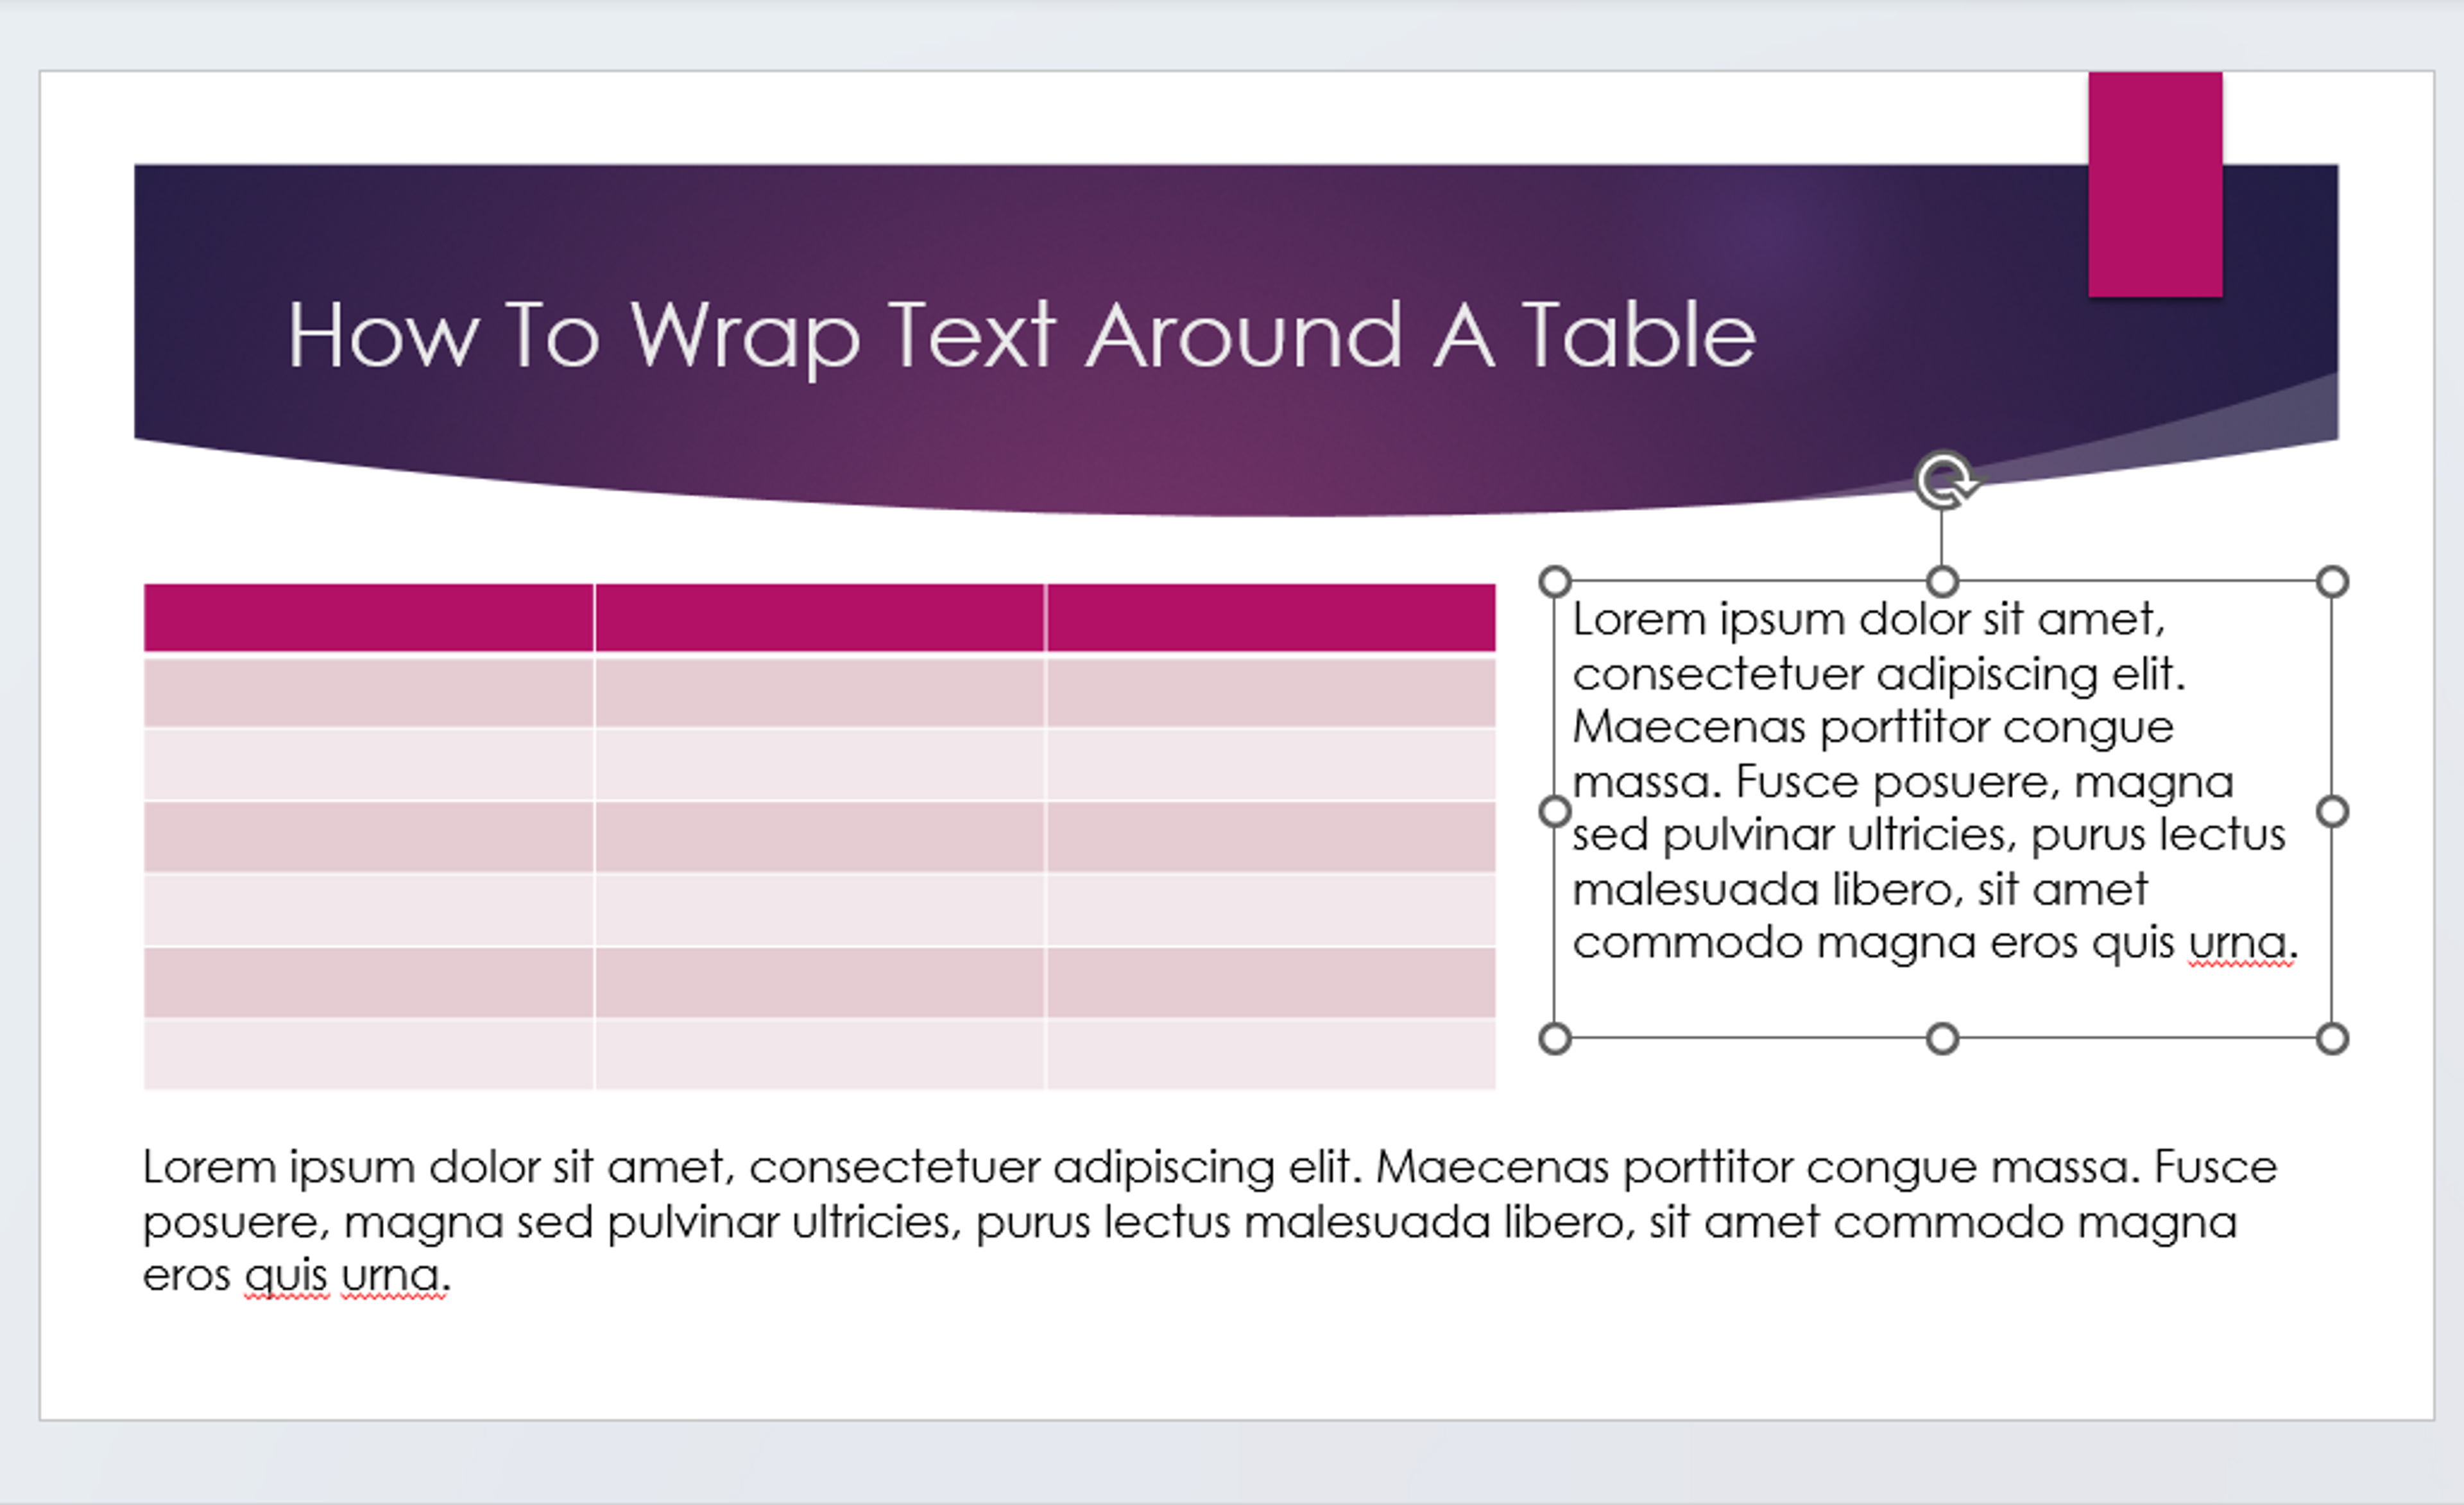 Text wrapped around a table in MS PowerPoint